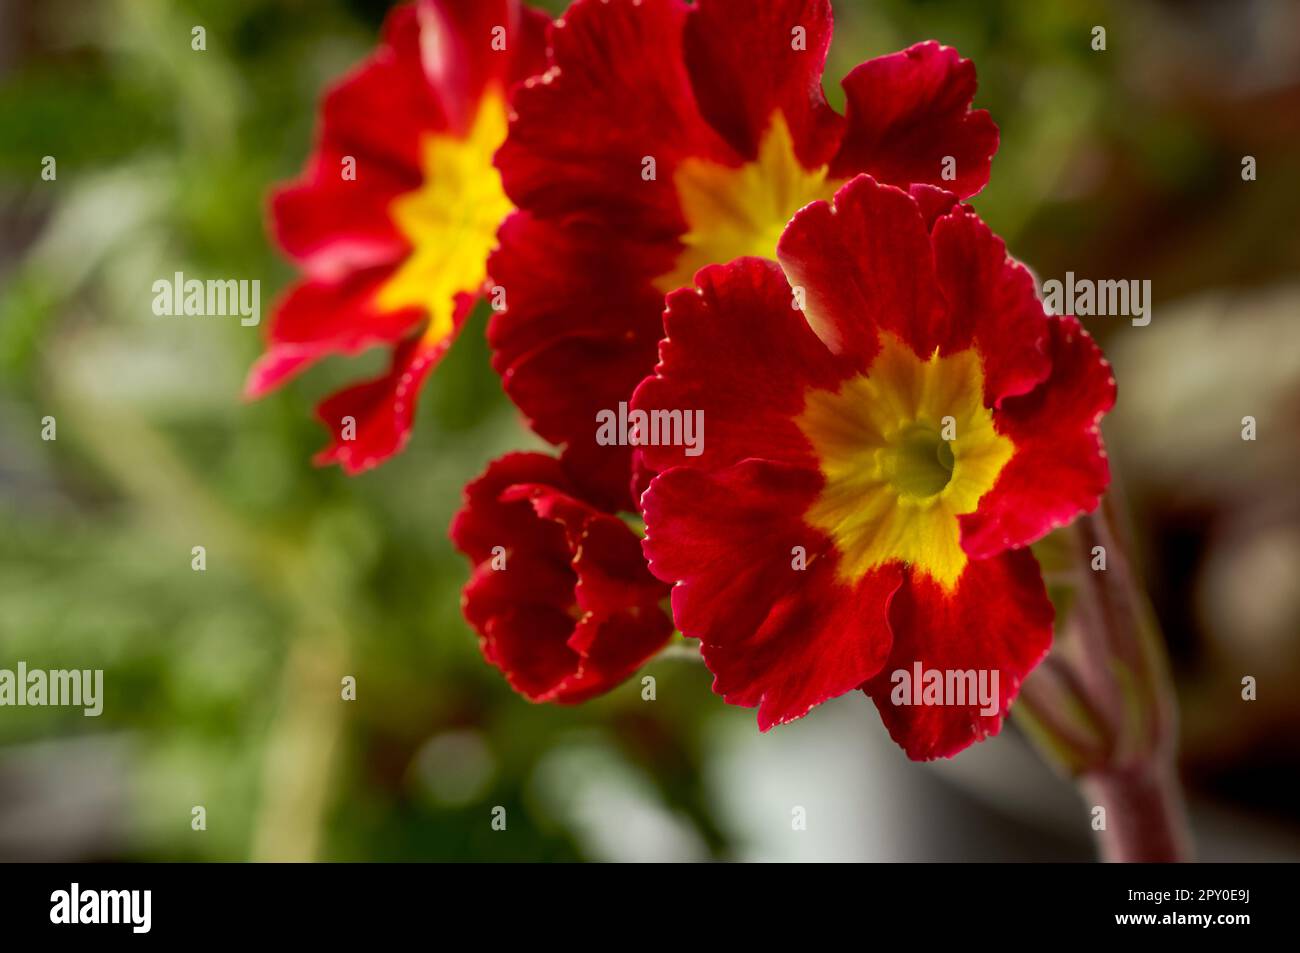 Primula elatior, Primula Primrose, red and yellow flower petals, in full bloom against a light background in close-up Stock Photo